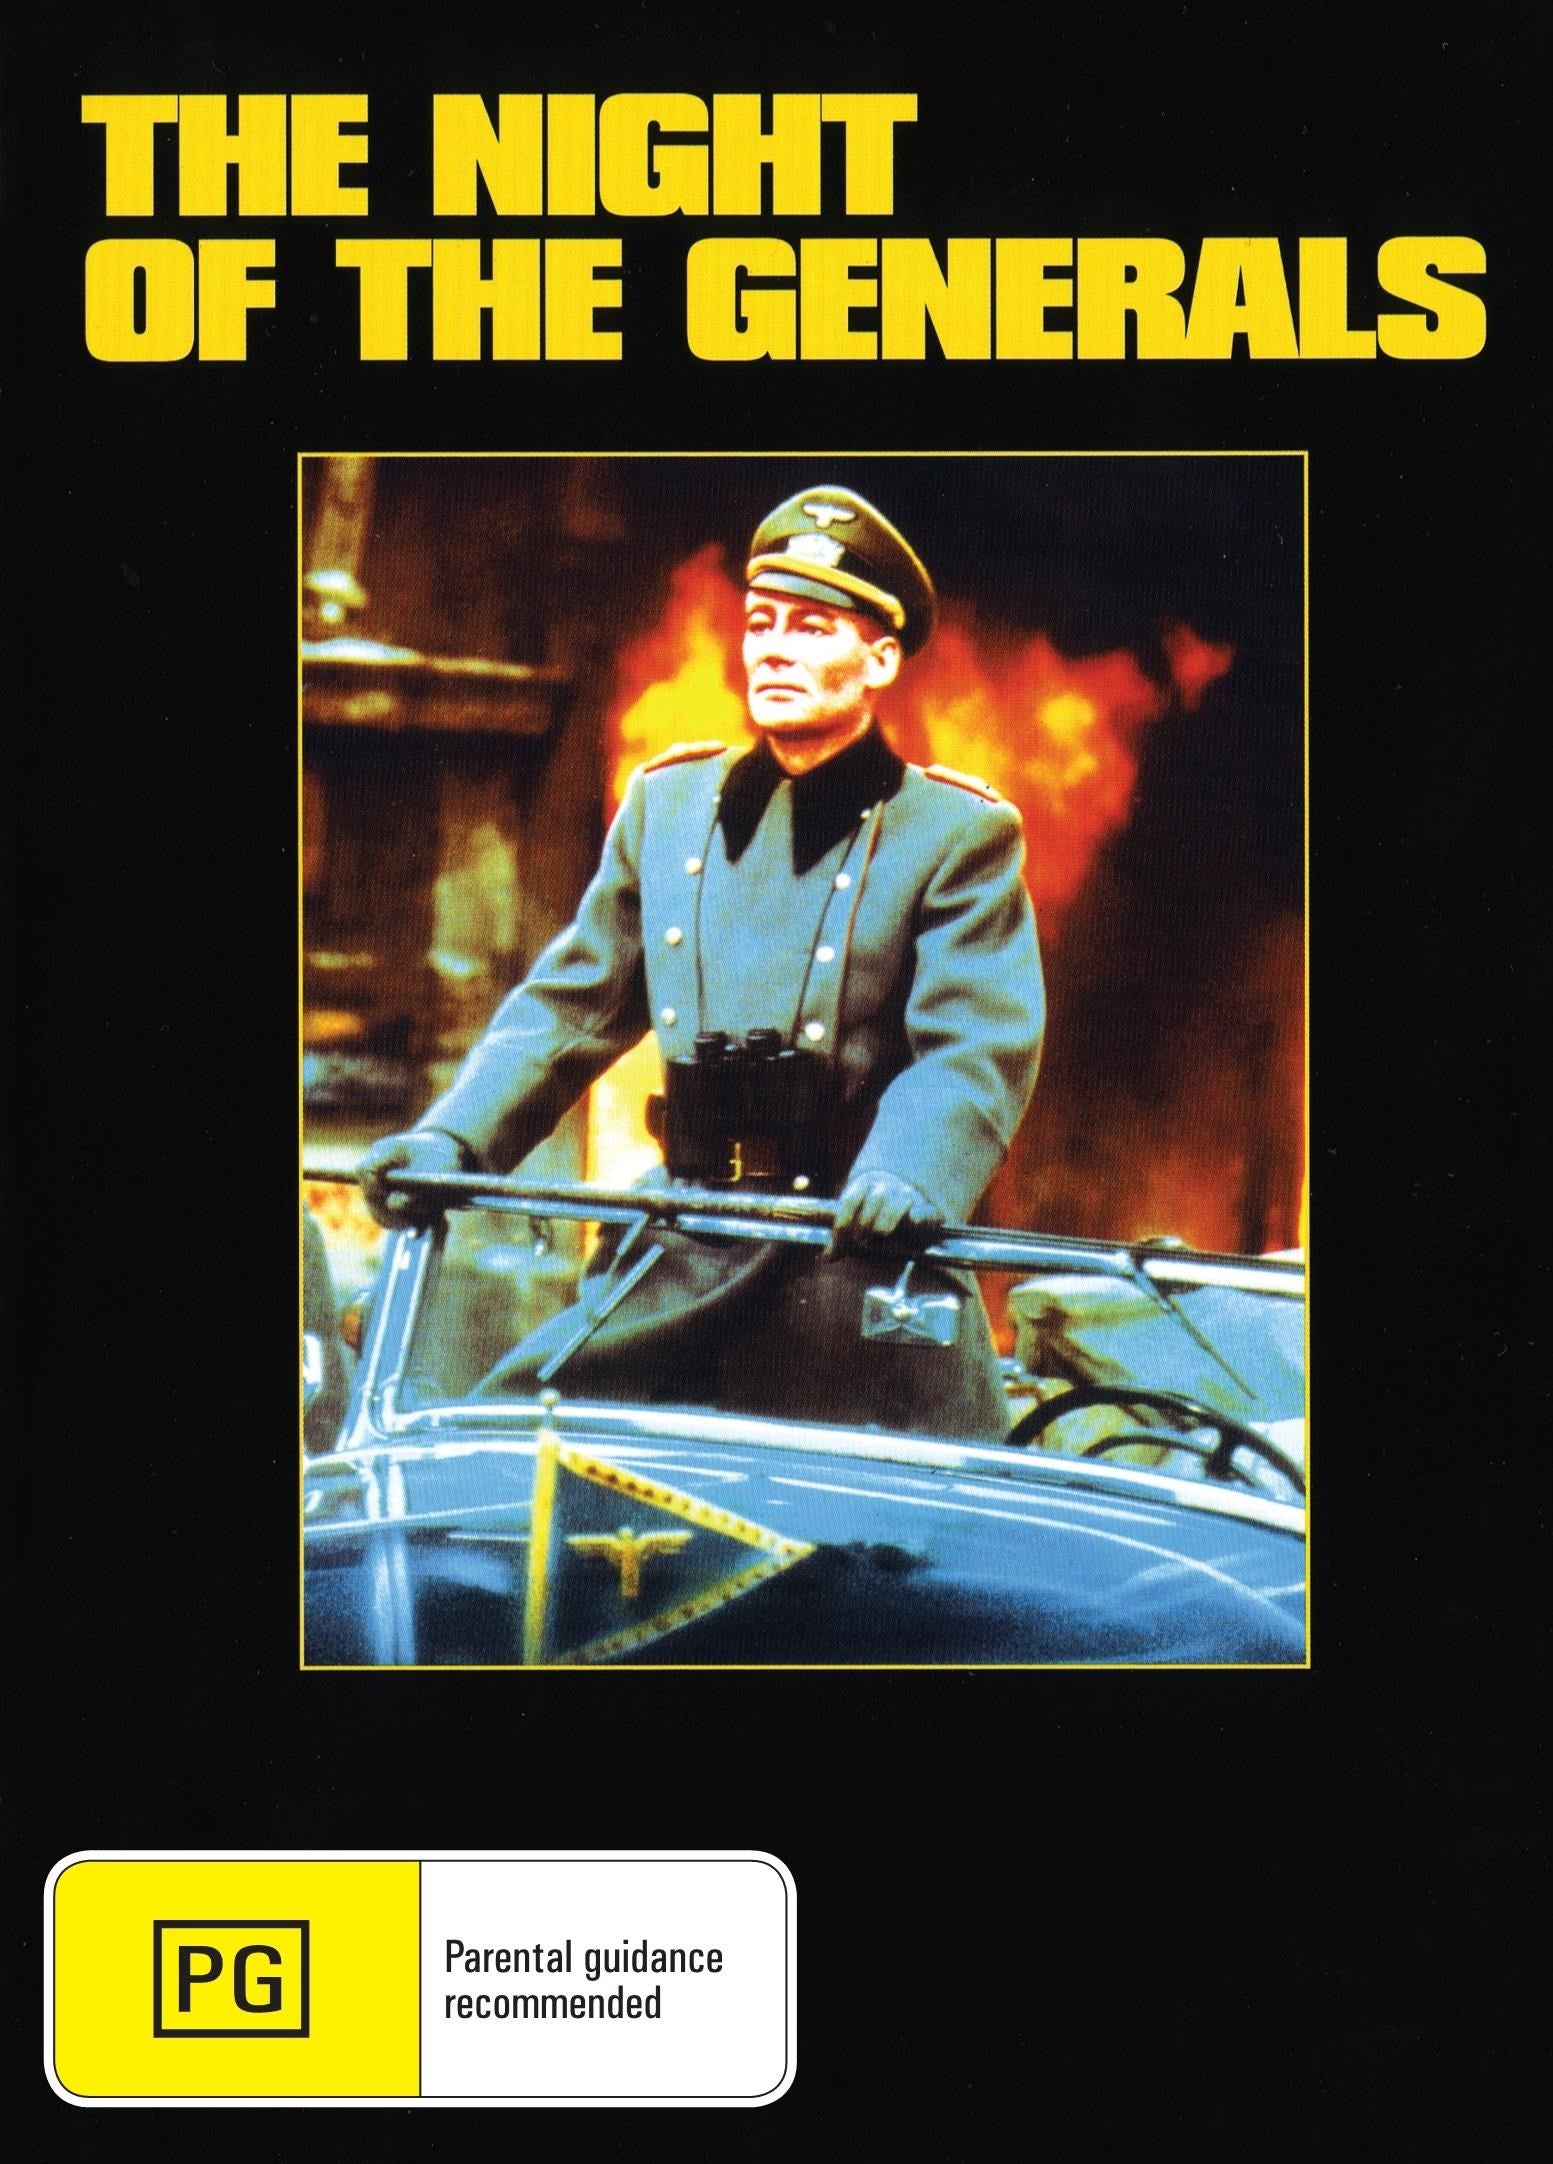 The Night Of The Generals rareandcollectibledvds